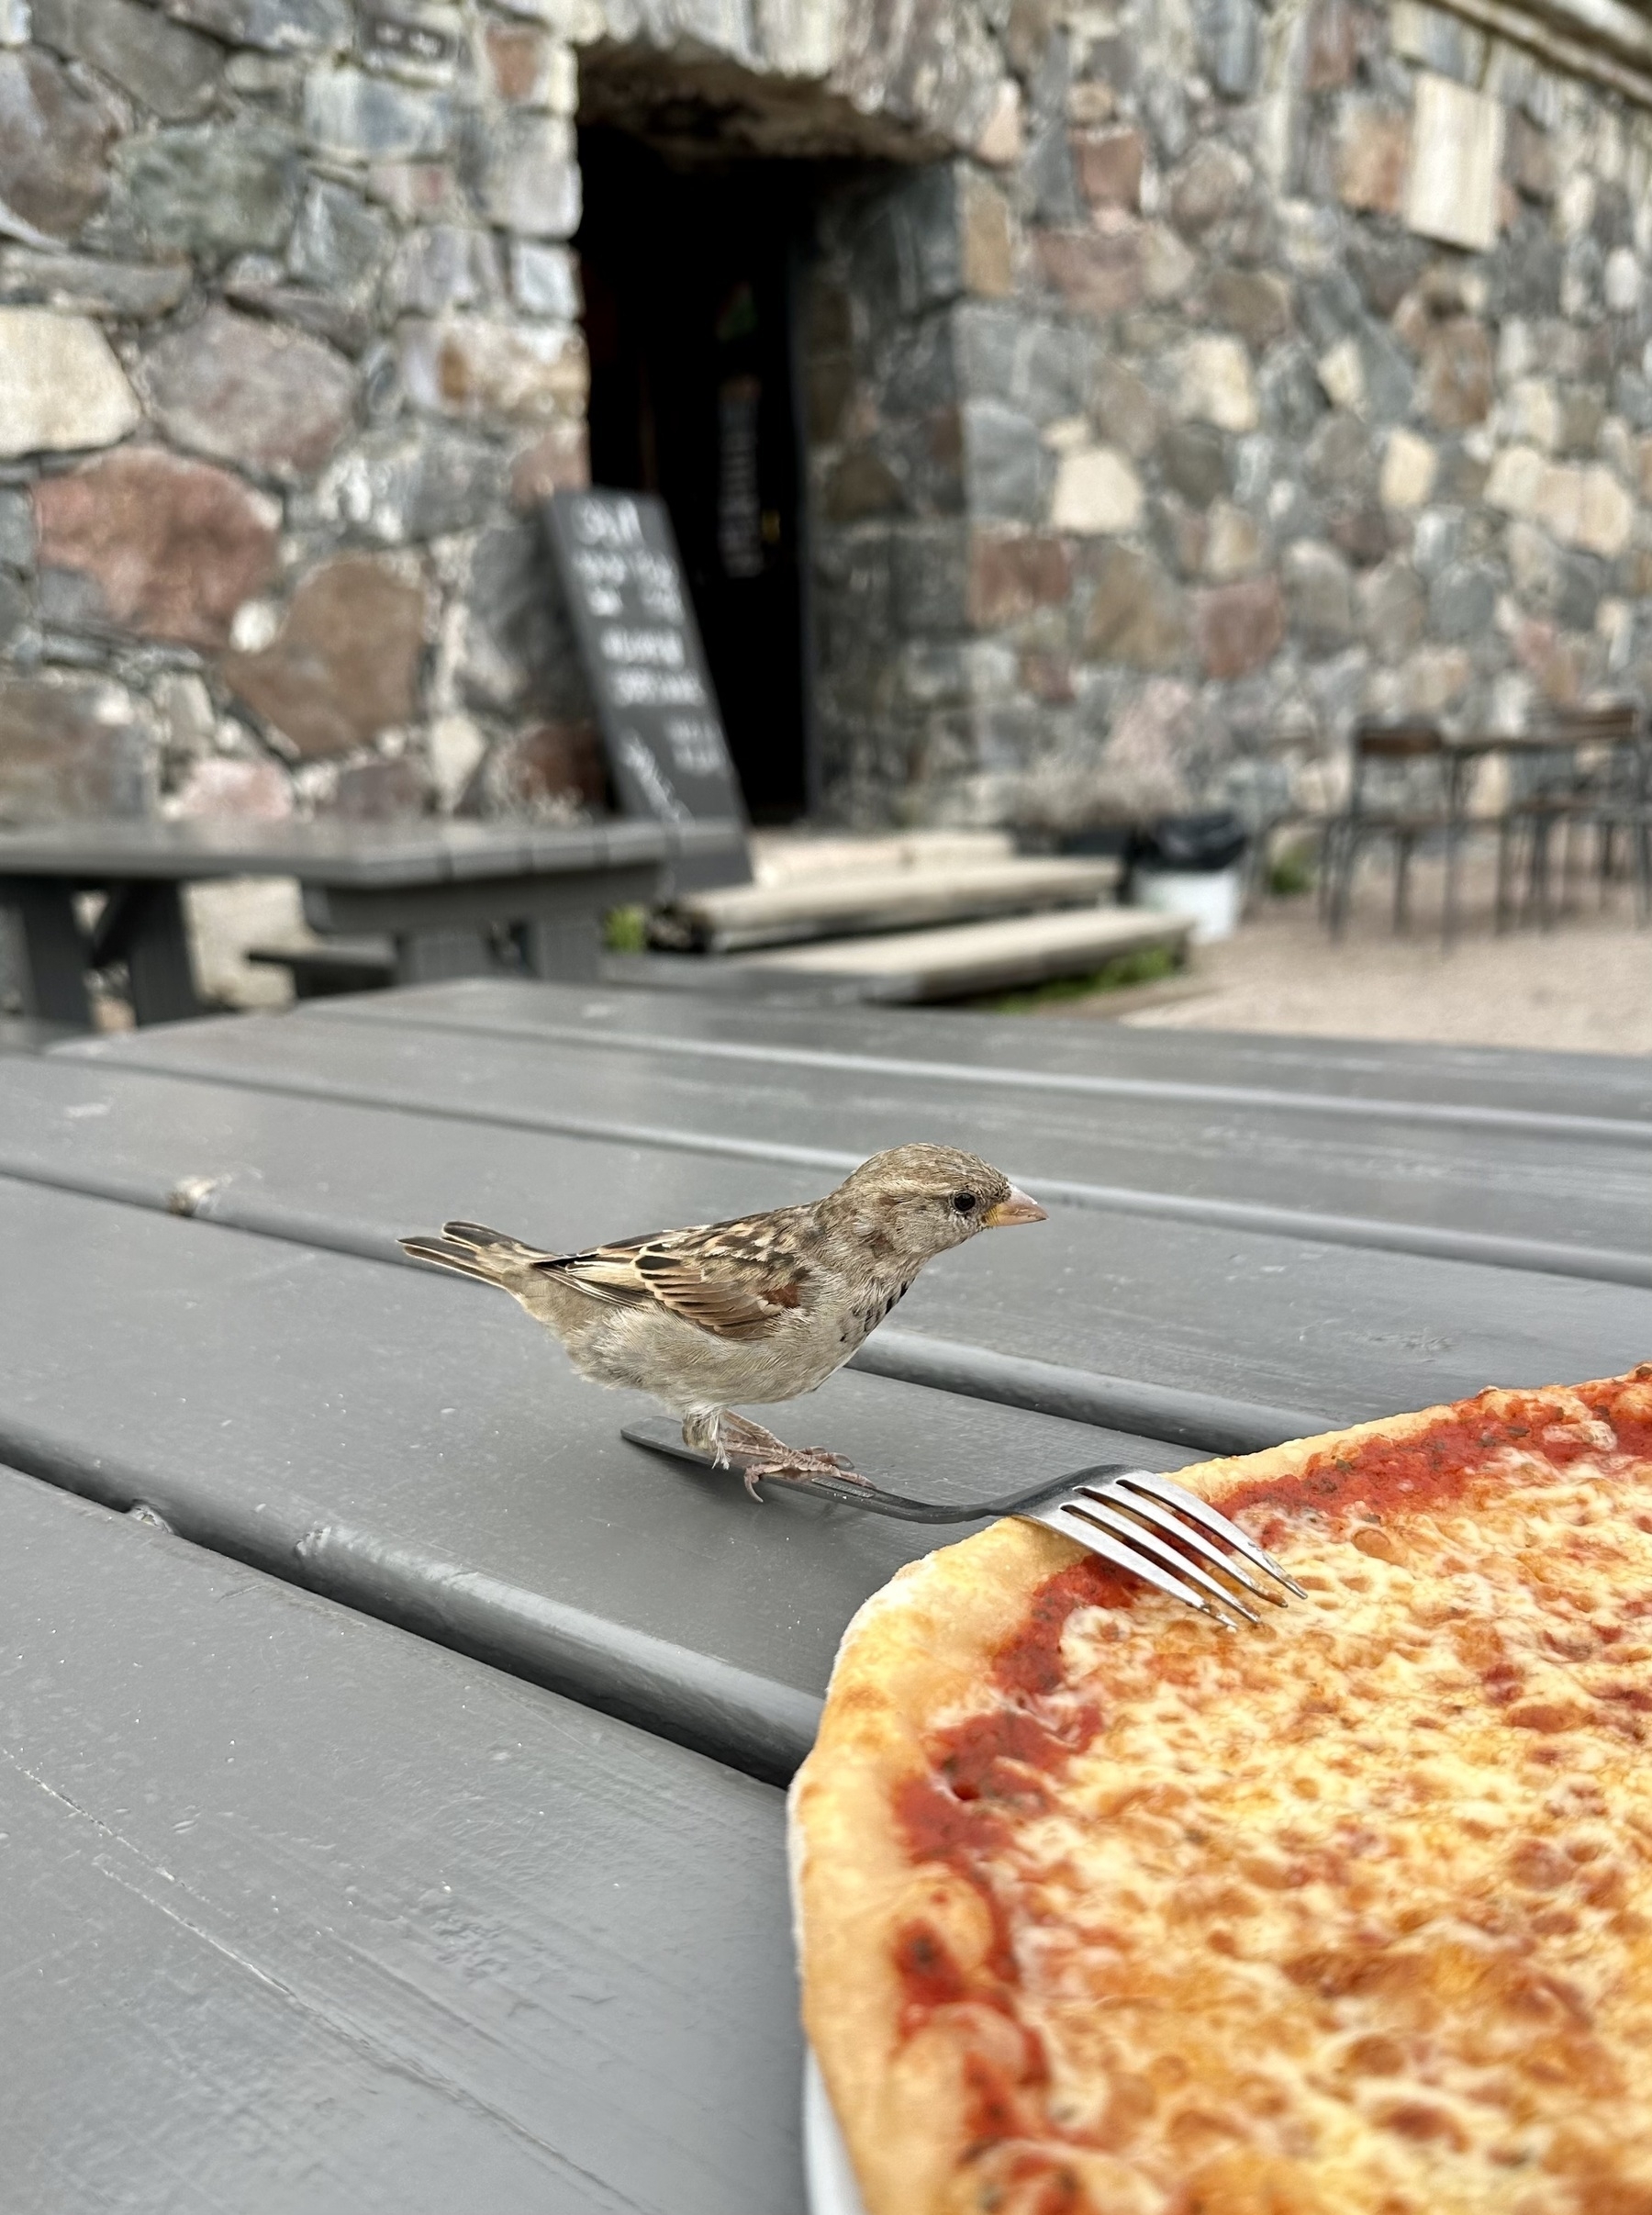 A sparrow perched on a fork next to a pizza.